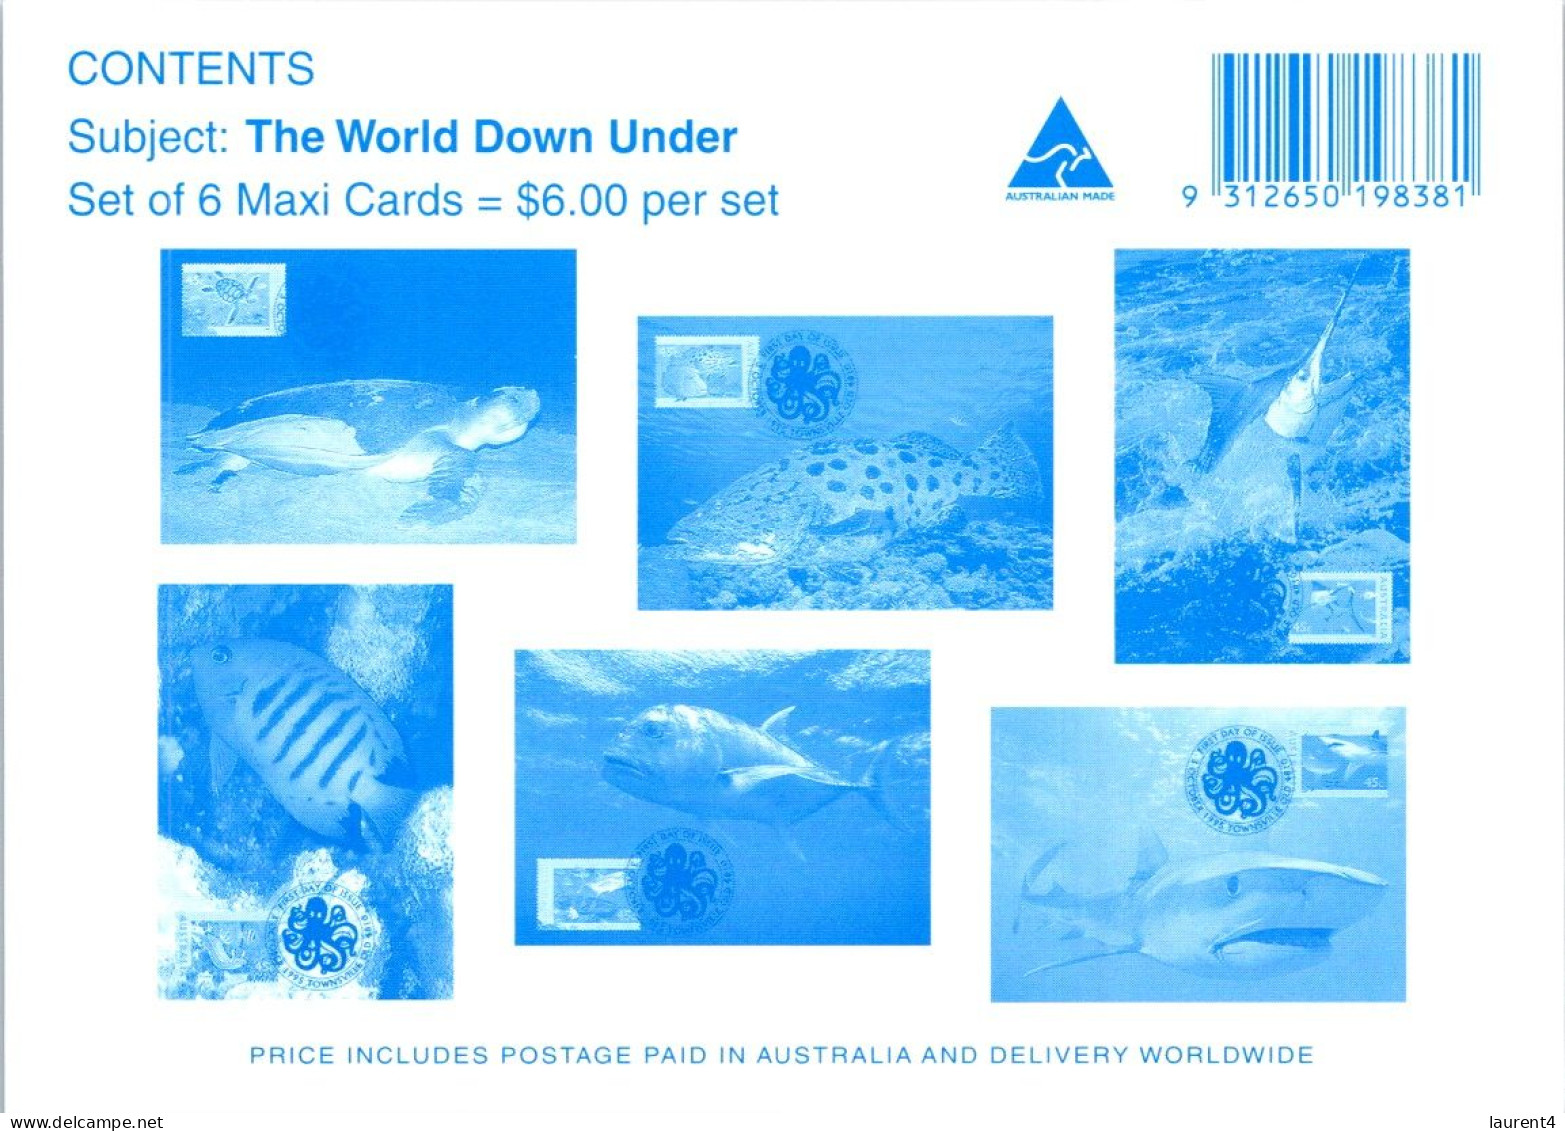 20-5-2024 (5 Z 39) Australia (6 Maxicard) Fish - shark - turtle etc (if not sold will NOT be re-listed)